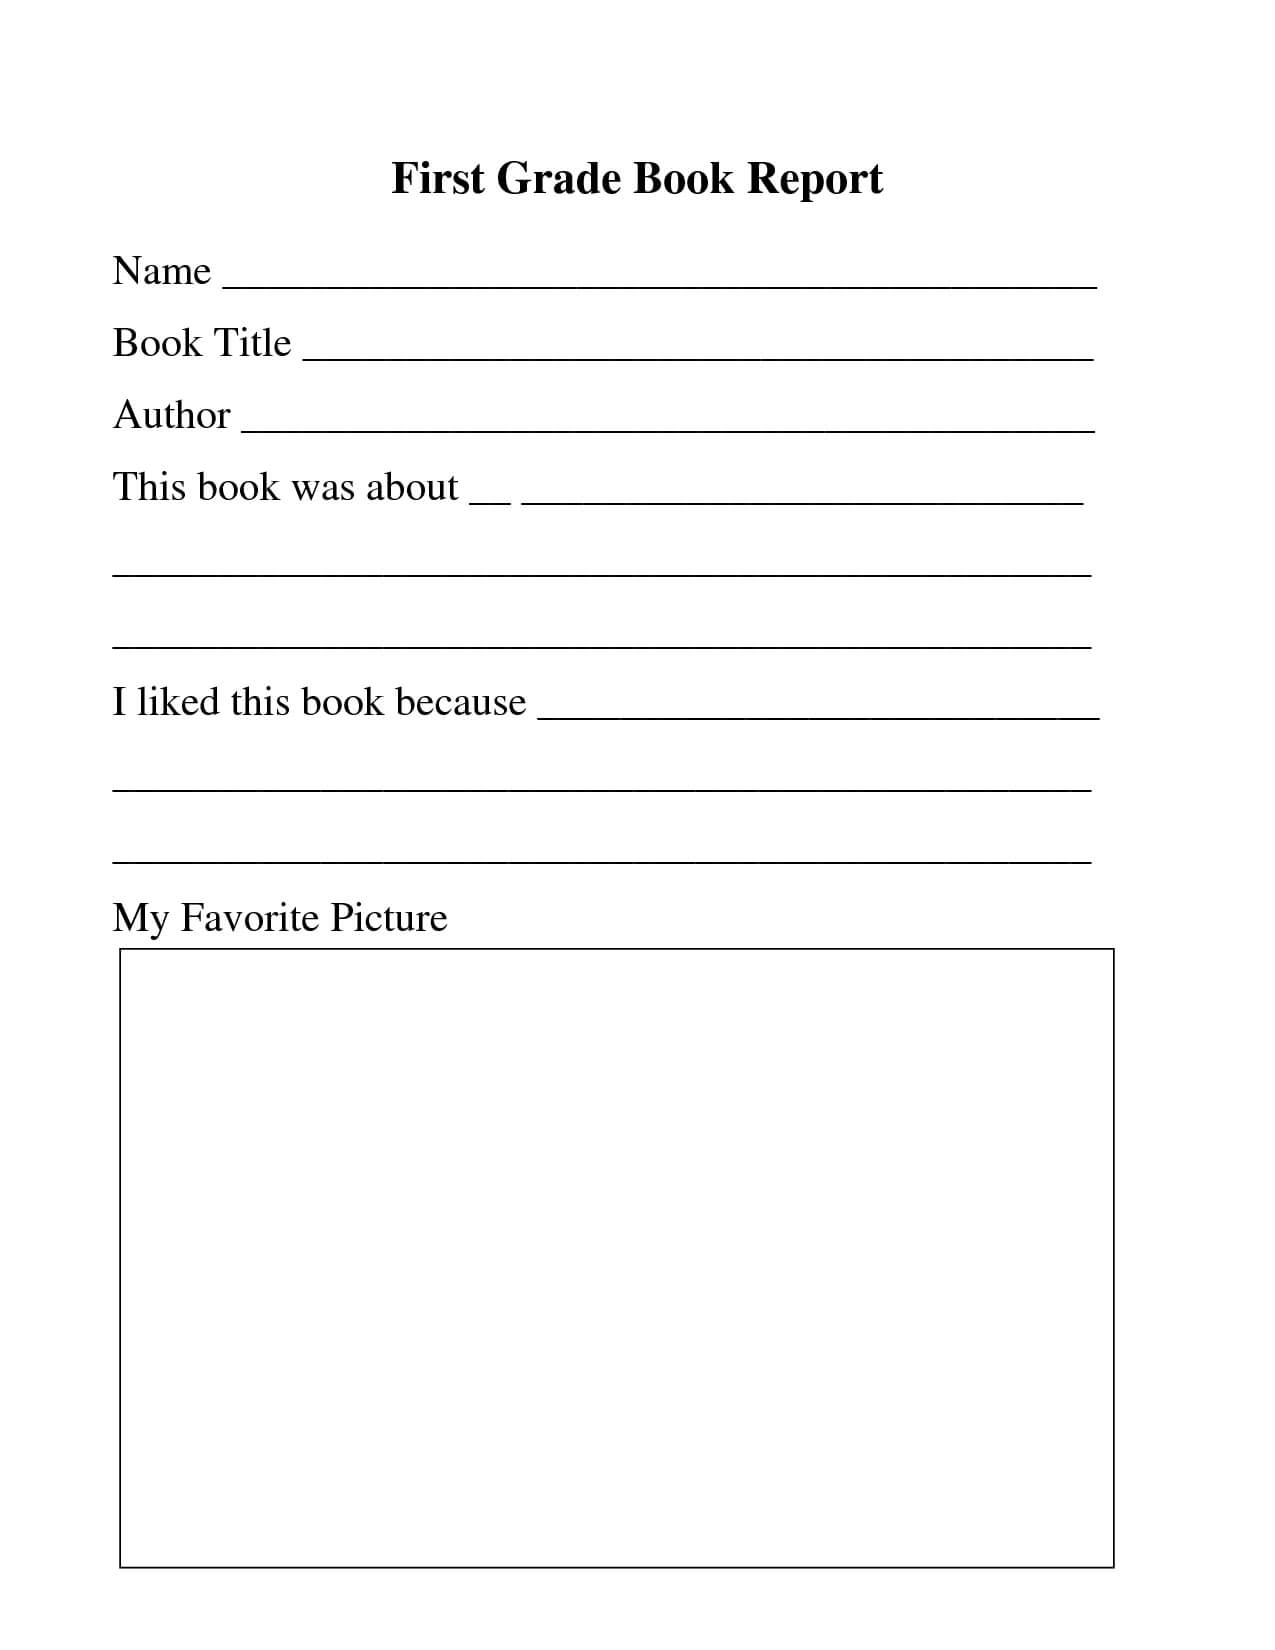 28 Images Of Template For First Grade List | Masorler Within First Grade Book Report Template